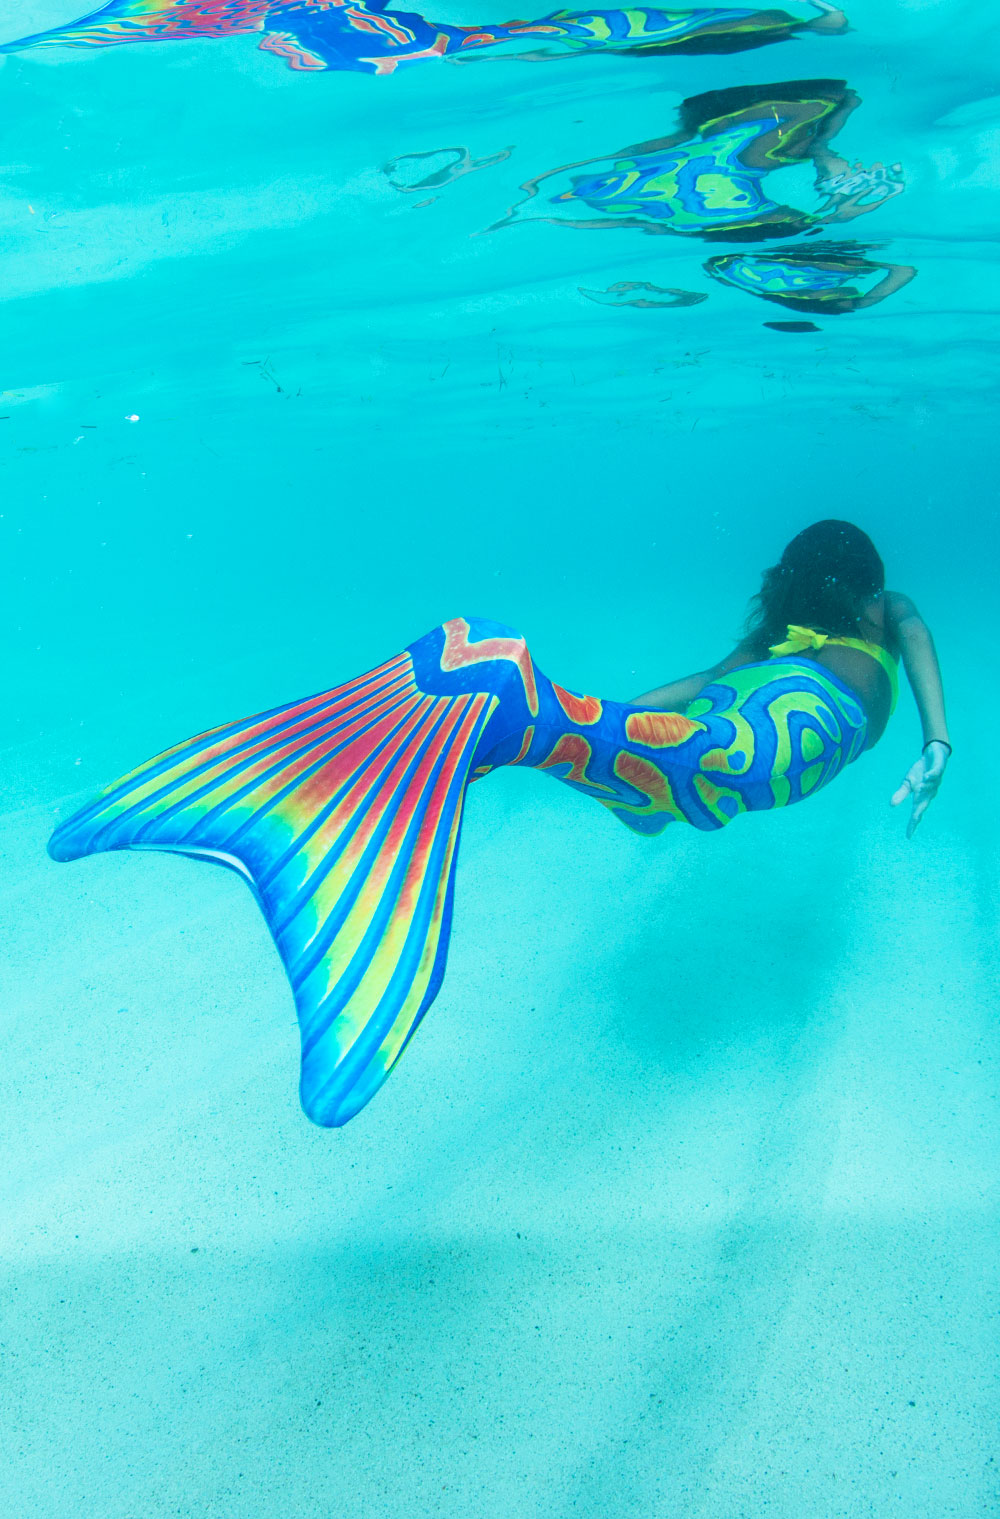 Kids Mermaid Tails for Swimming - Fin Fun Limited Edition - With ...